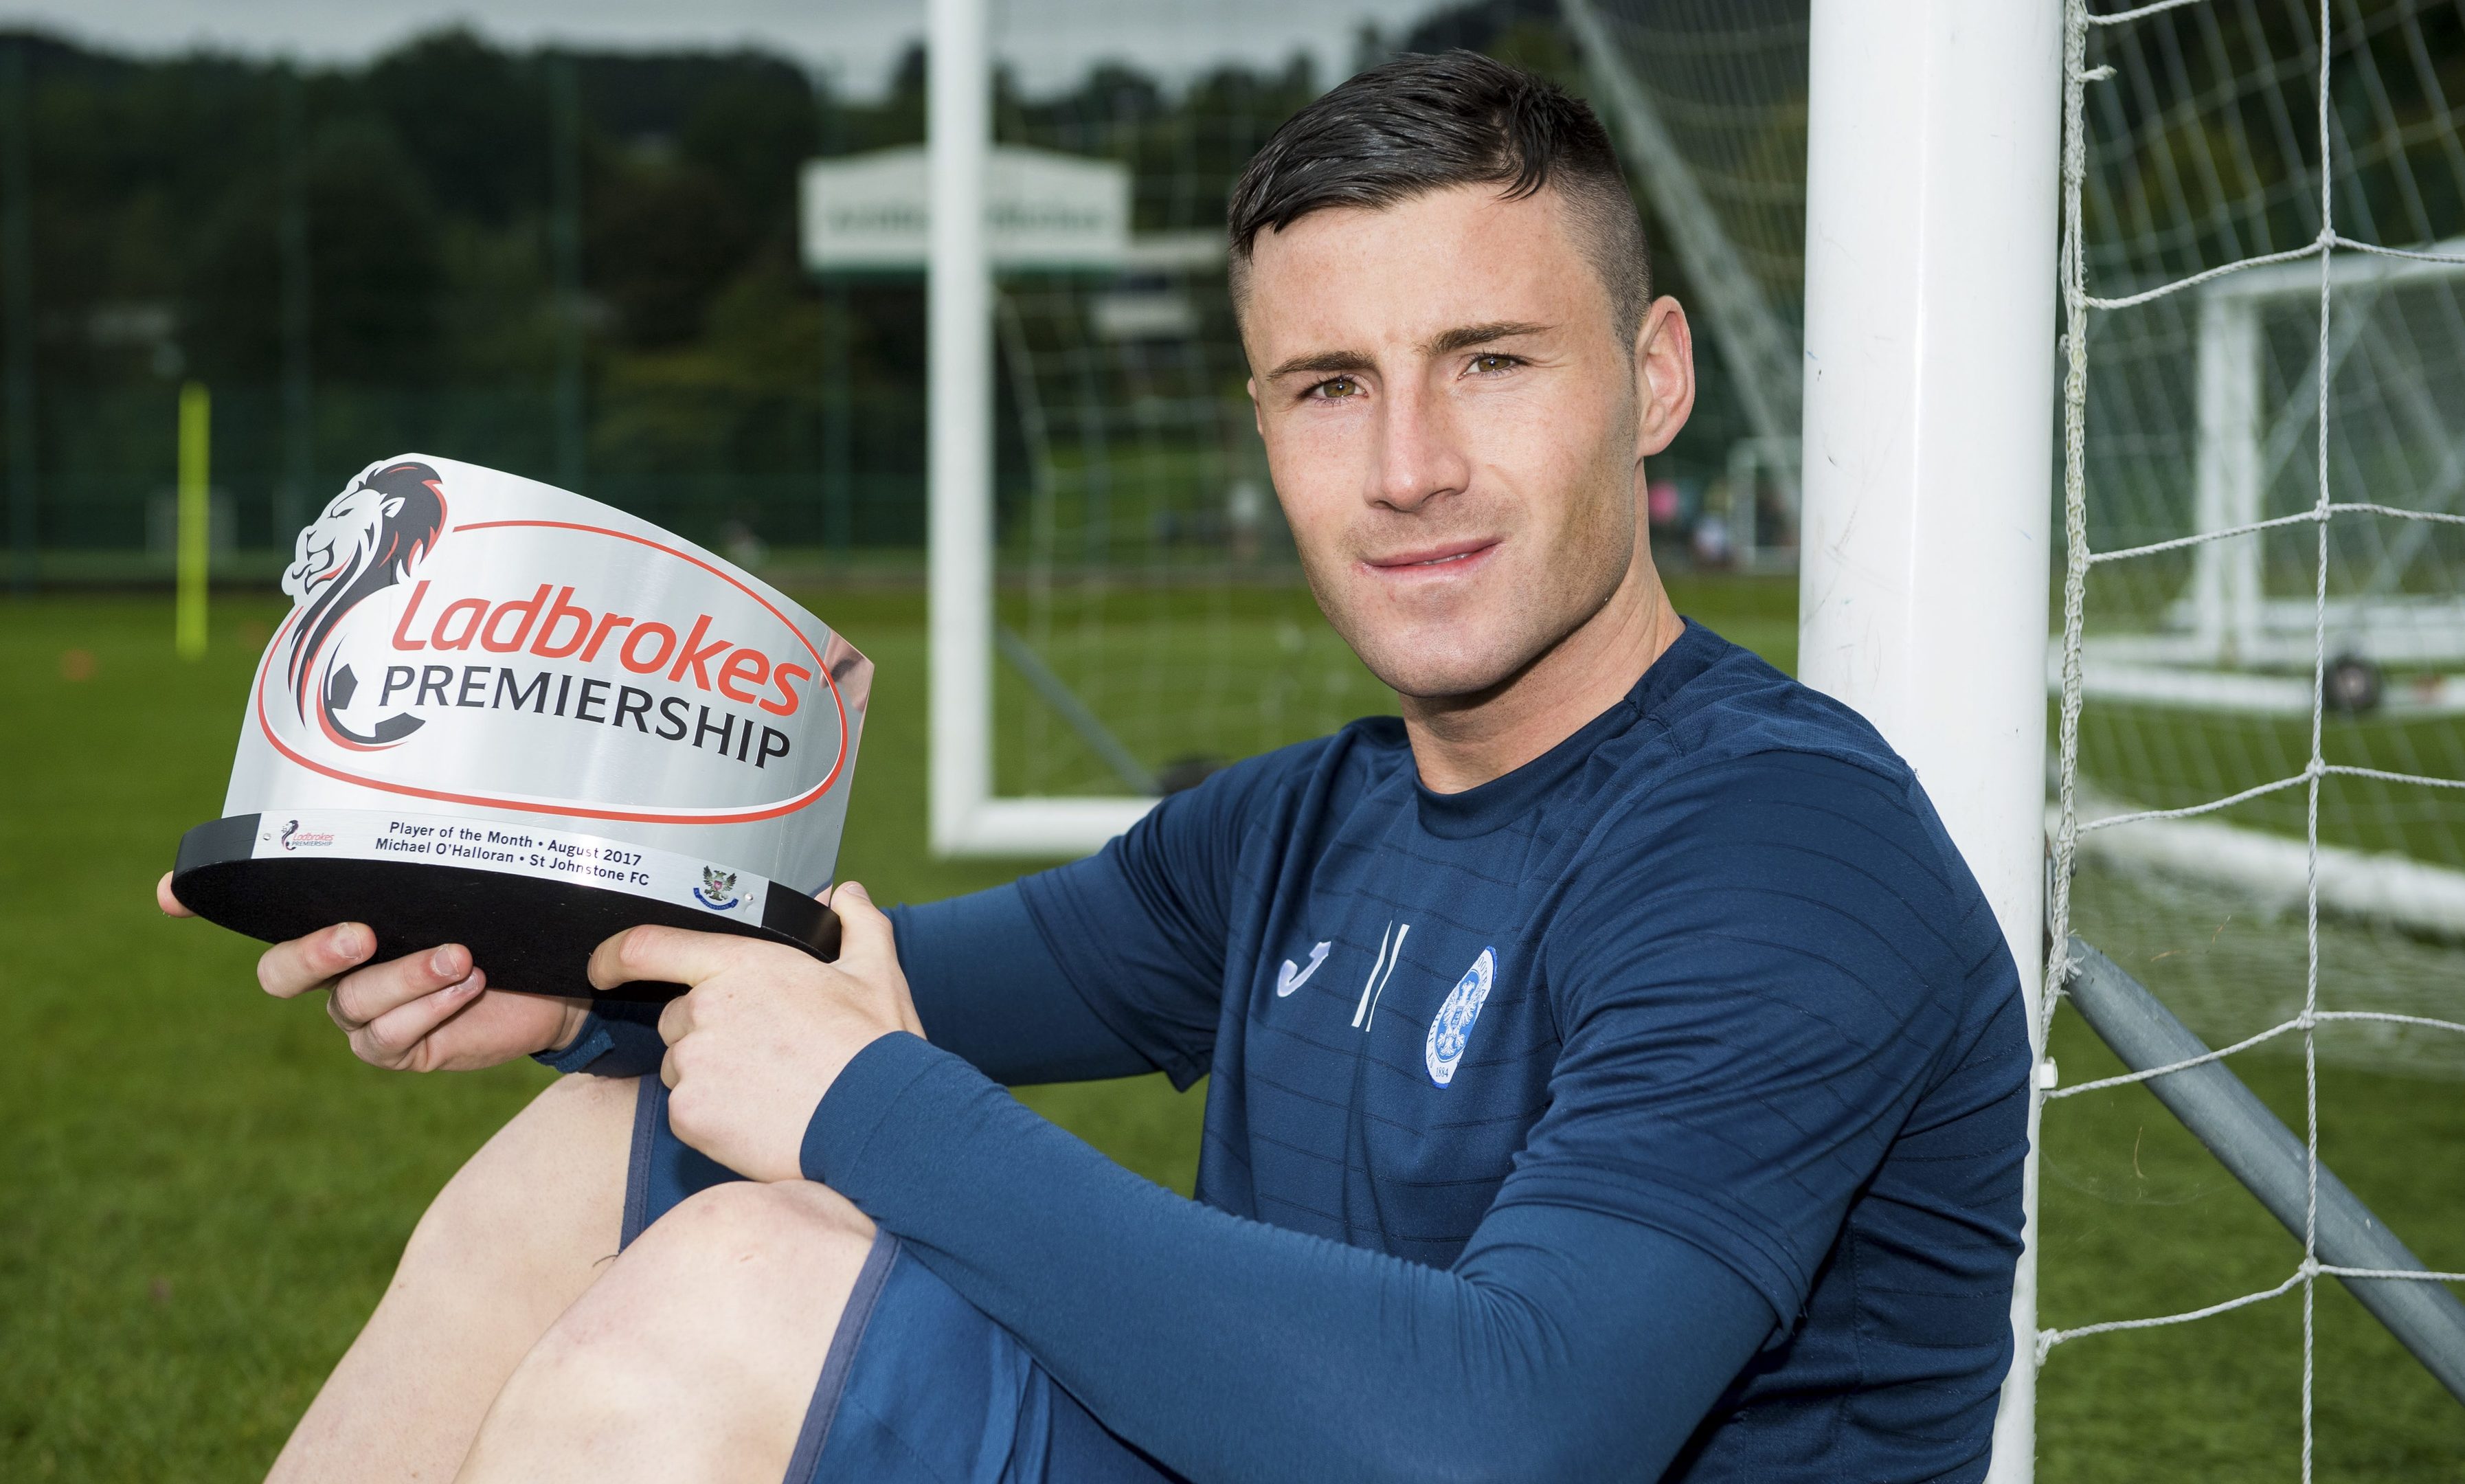 Michael O'Halloran with his Ladbrokes Premiership Player of the Month award for August.